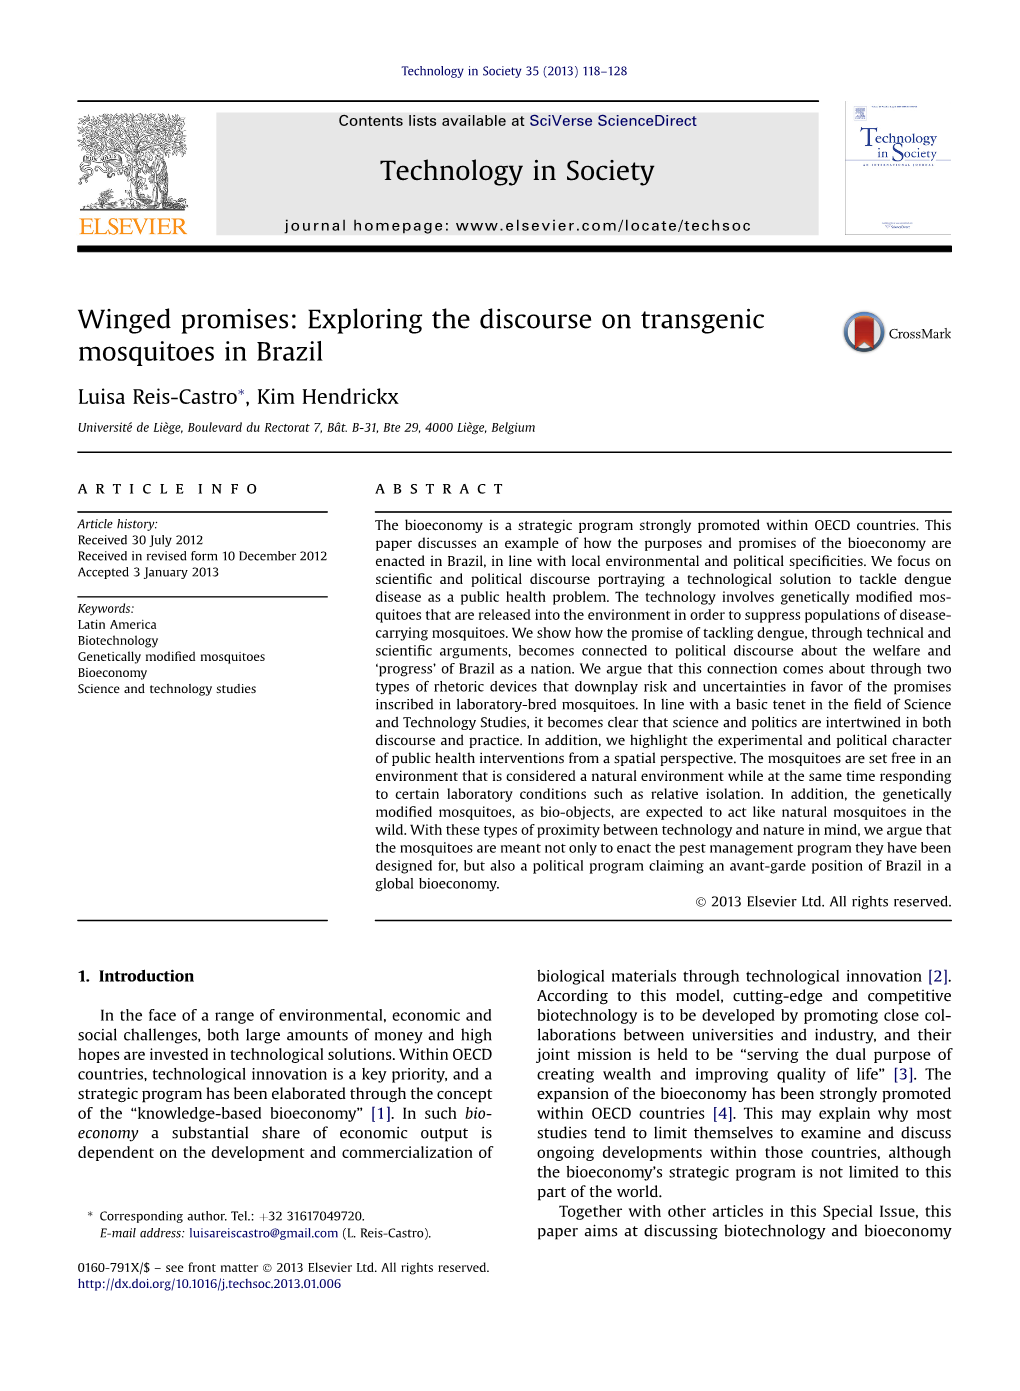 Exploring the Discourse on Transgenic Mosquitoes in Brazil